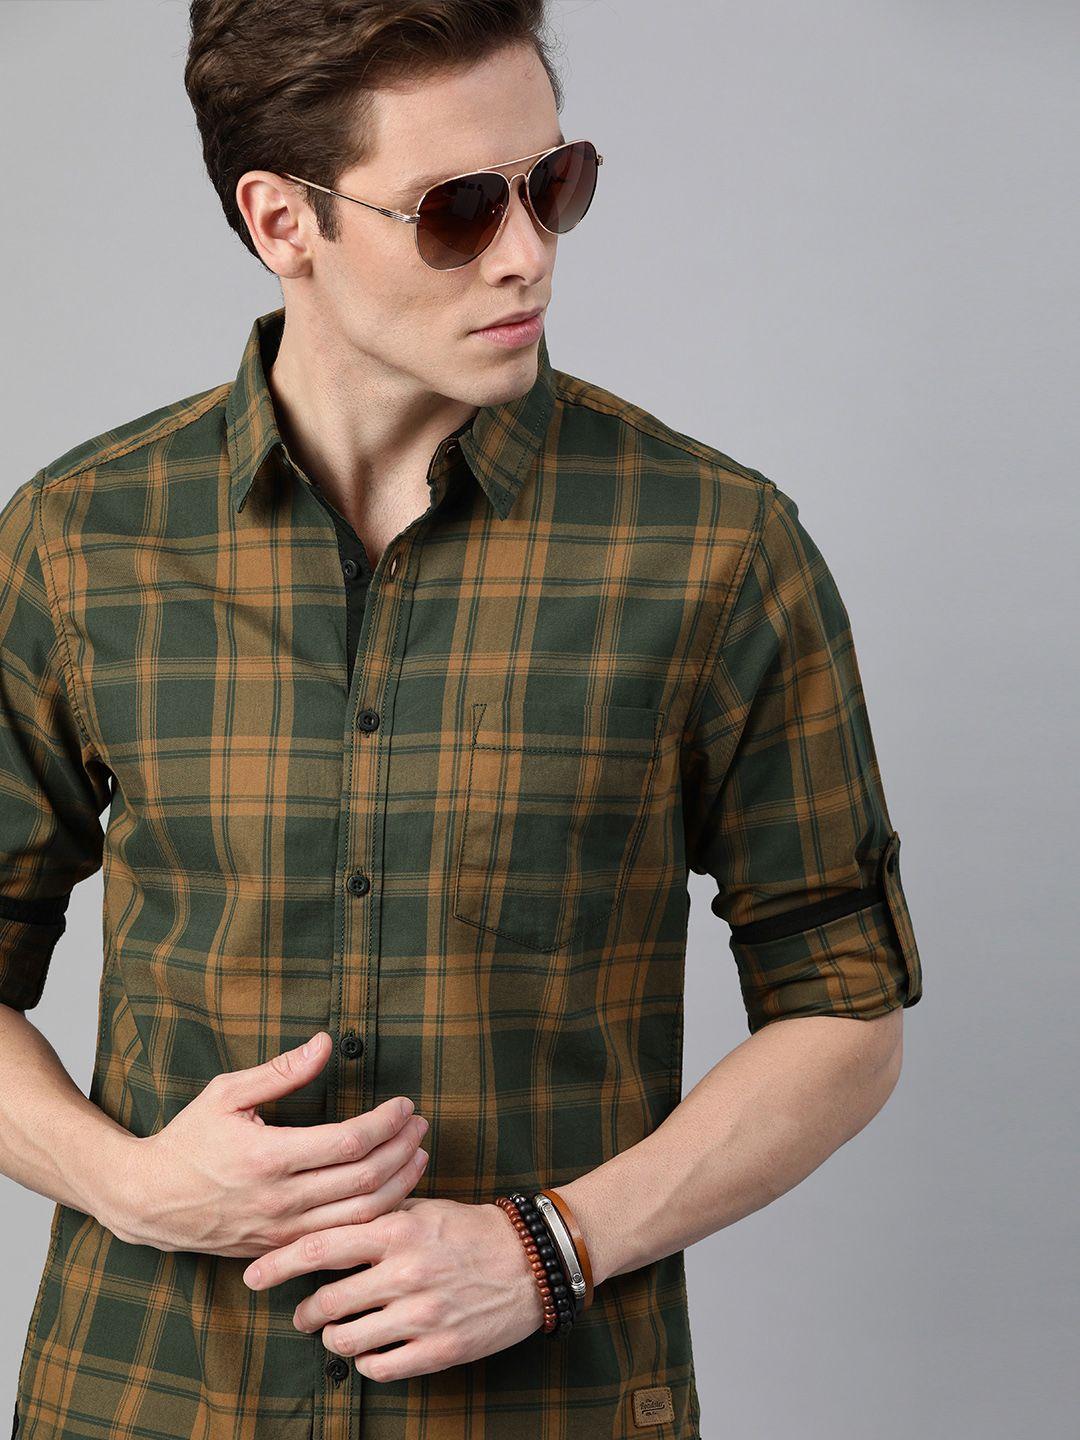 roadster-men-olive-green-&-mustard-yellow-checked-pure-cotton-casual-sustainable-shirt